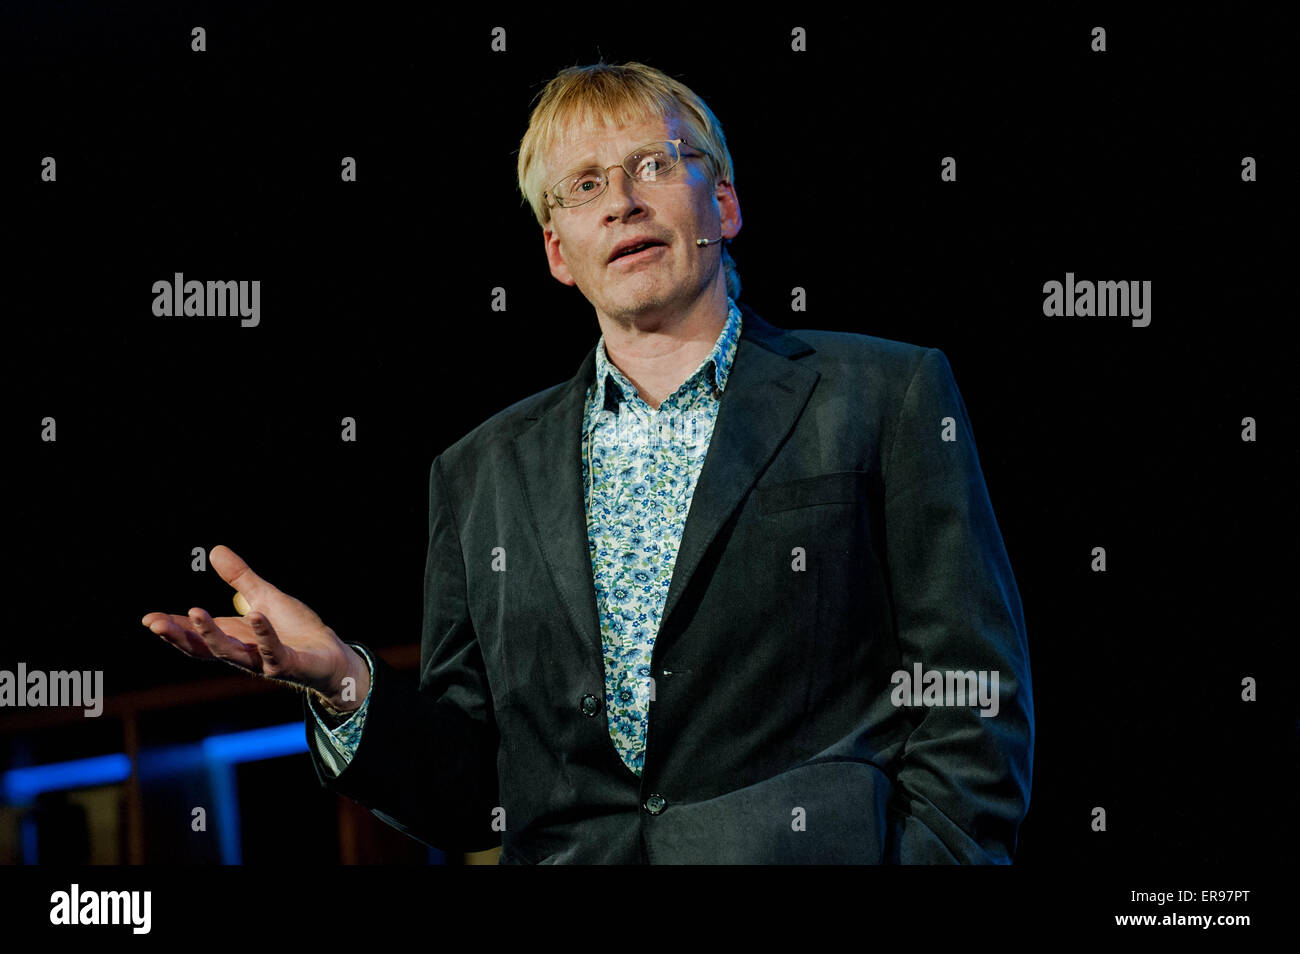 Hay on Wye, UK. Thursday 28 May 2015  Pictured: Dr. Phill Hammond es while reading a book  at the Hay Festival RE: The Hay Festival takes place in Hay on Wye, Powys, Wales Stock Photo